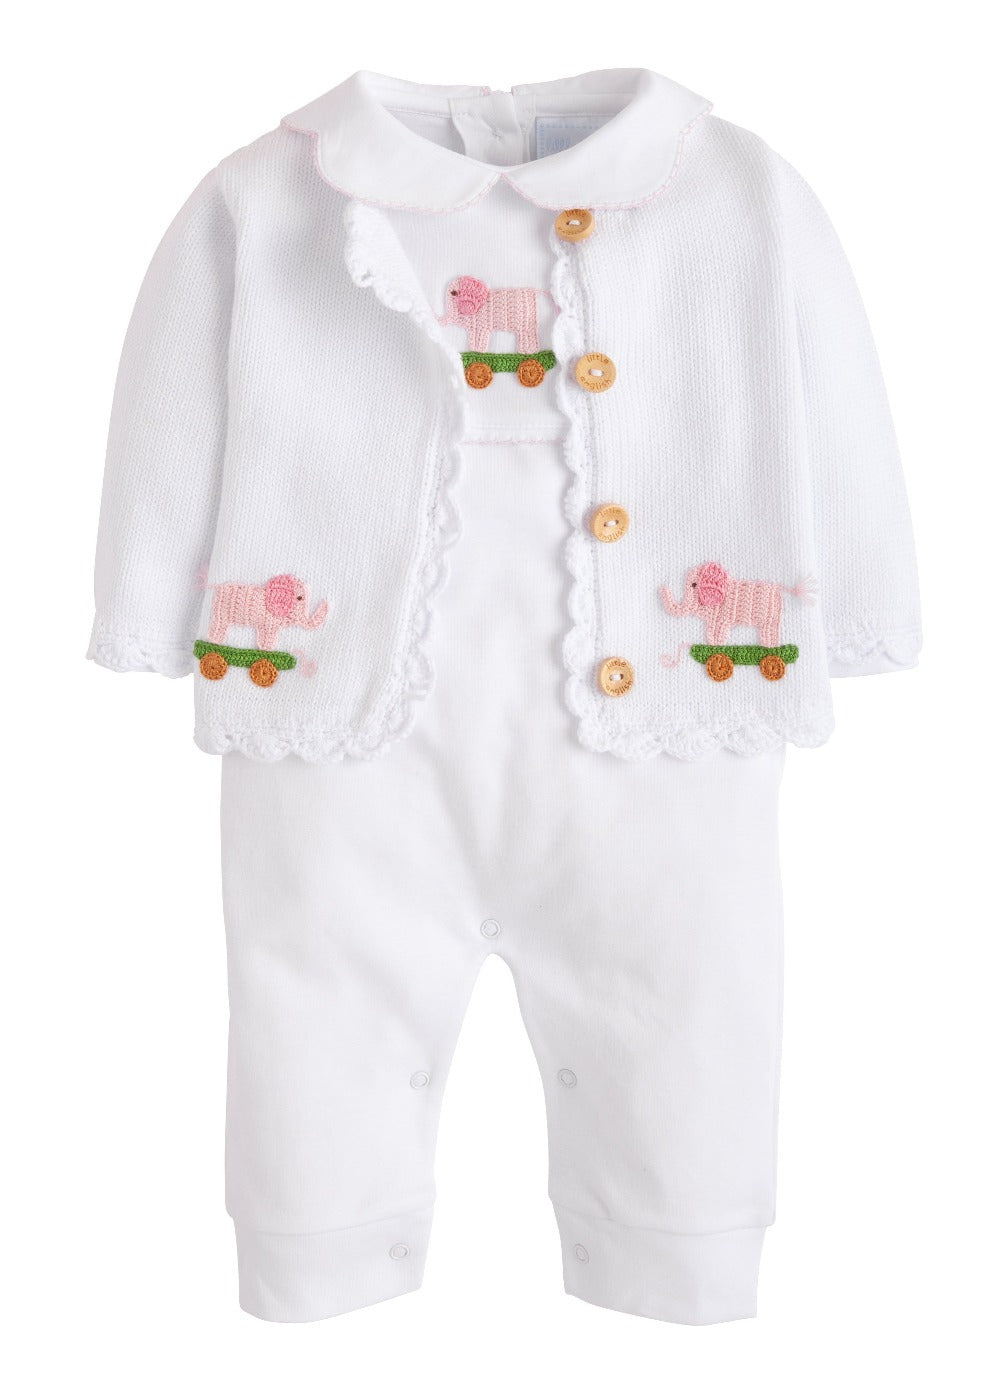 seguridadindustrialcr traditional baby clothing, signature crochet playsuit with pink elephant for baby girl